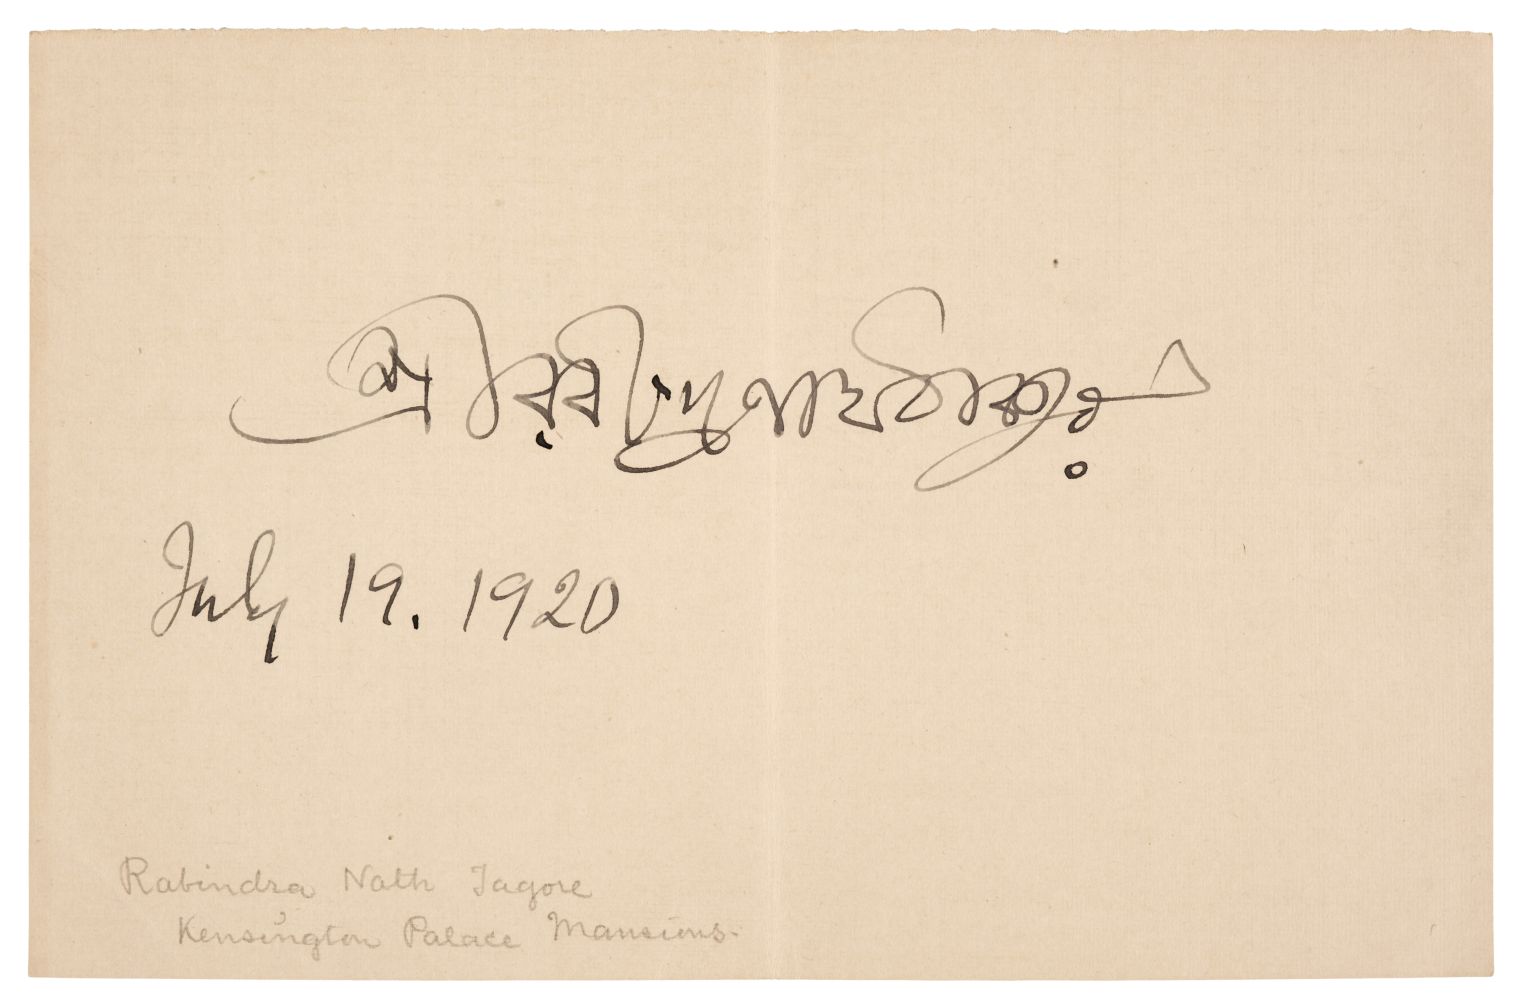 Tagore (Rabindranath, 1861-1941). Autograph Ink Signature on an off-white sheet of paper